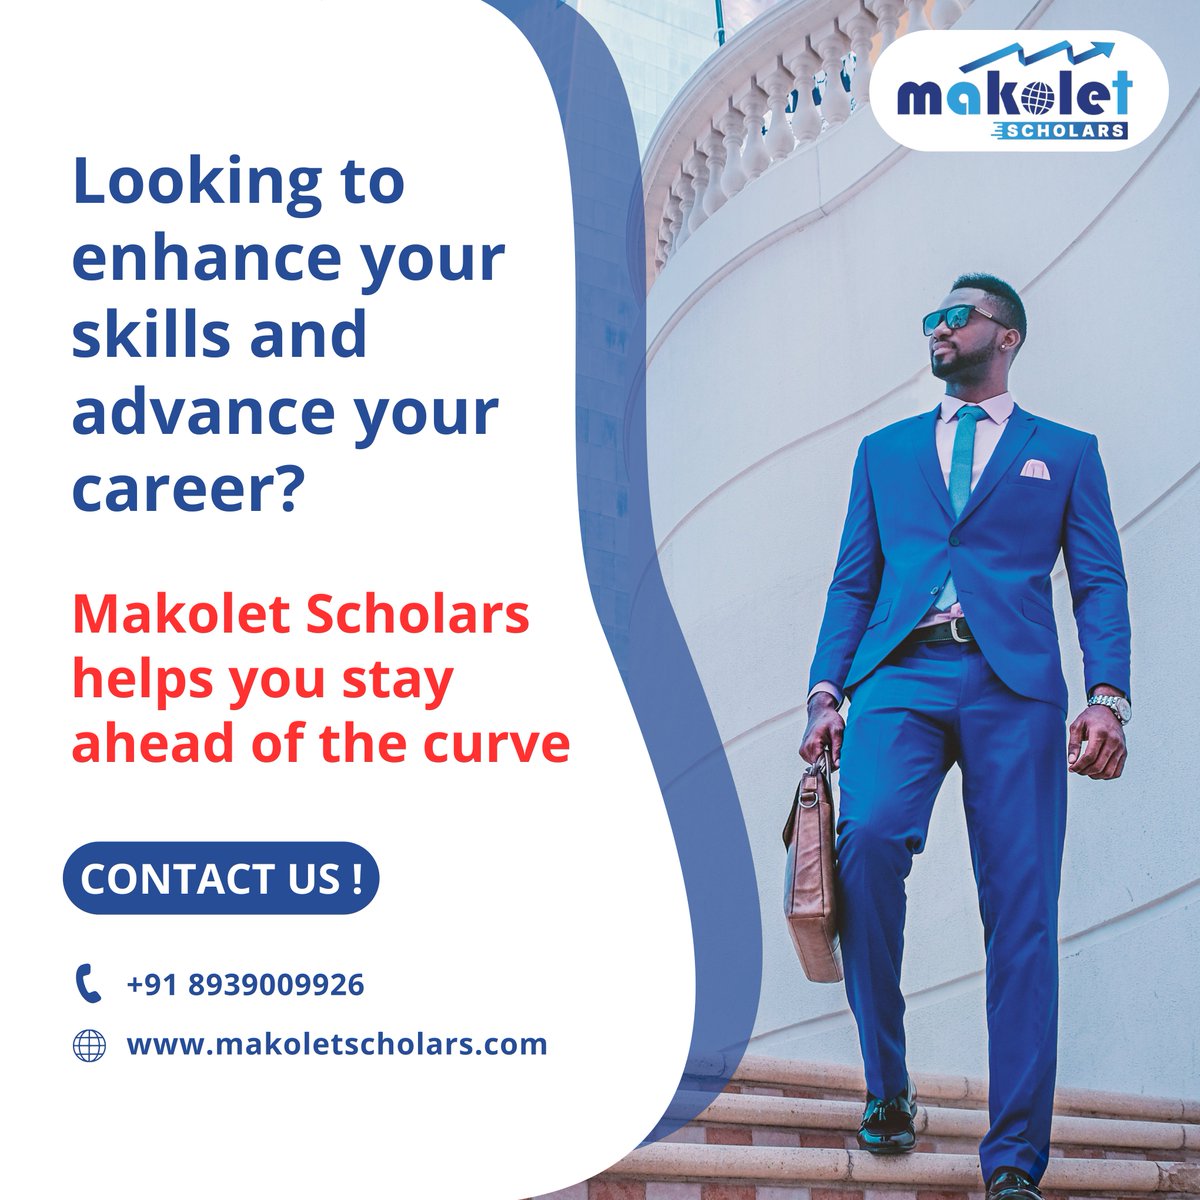 Upgrade your skills and stay ahead of the curve with Makolet Scholars, offering comprehensive programs to help you master the latest technologies and advance your career.
#EnglishCommunicationskill #Speakingskills #ReadingSkills #WritingSkills #InterviewSkills #language